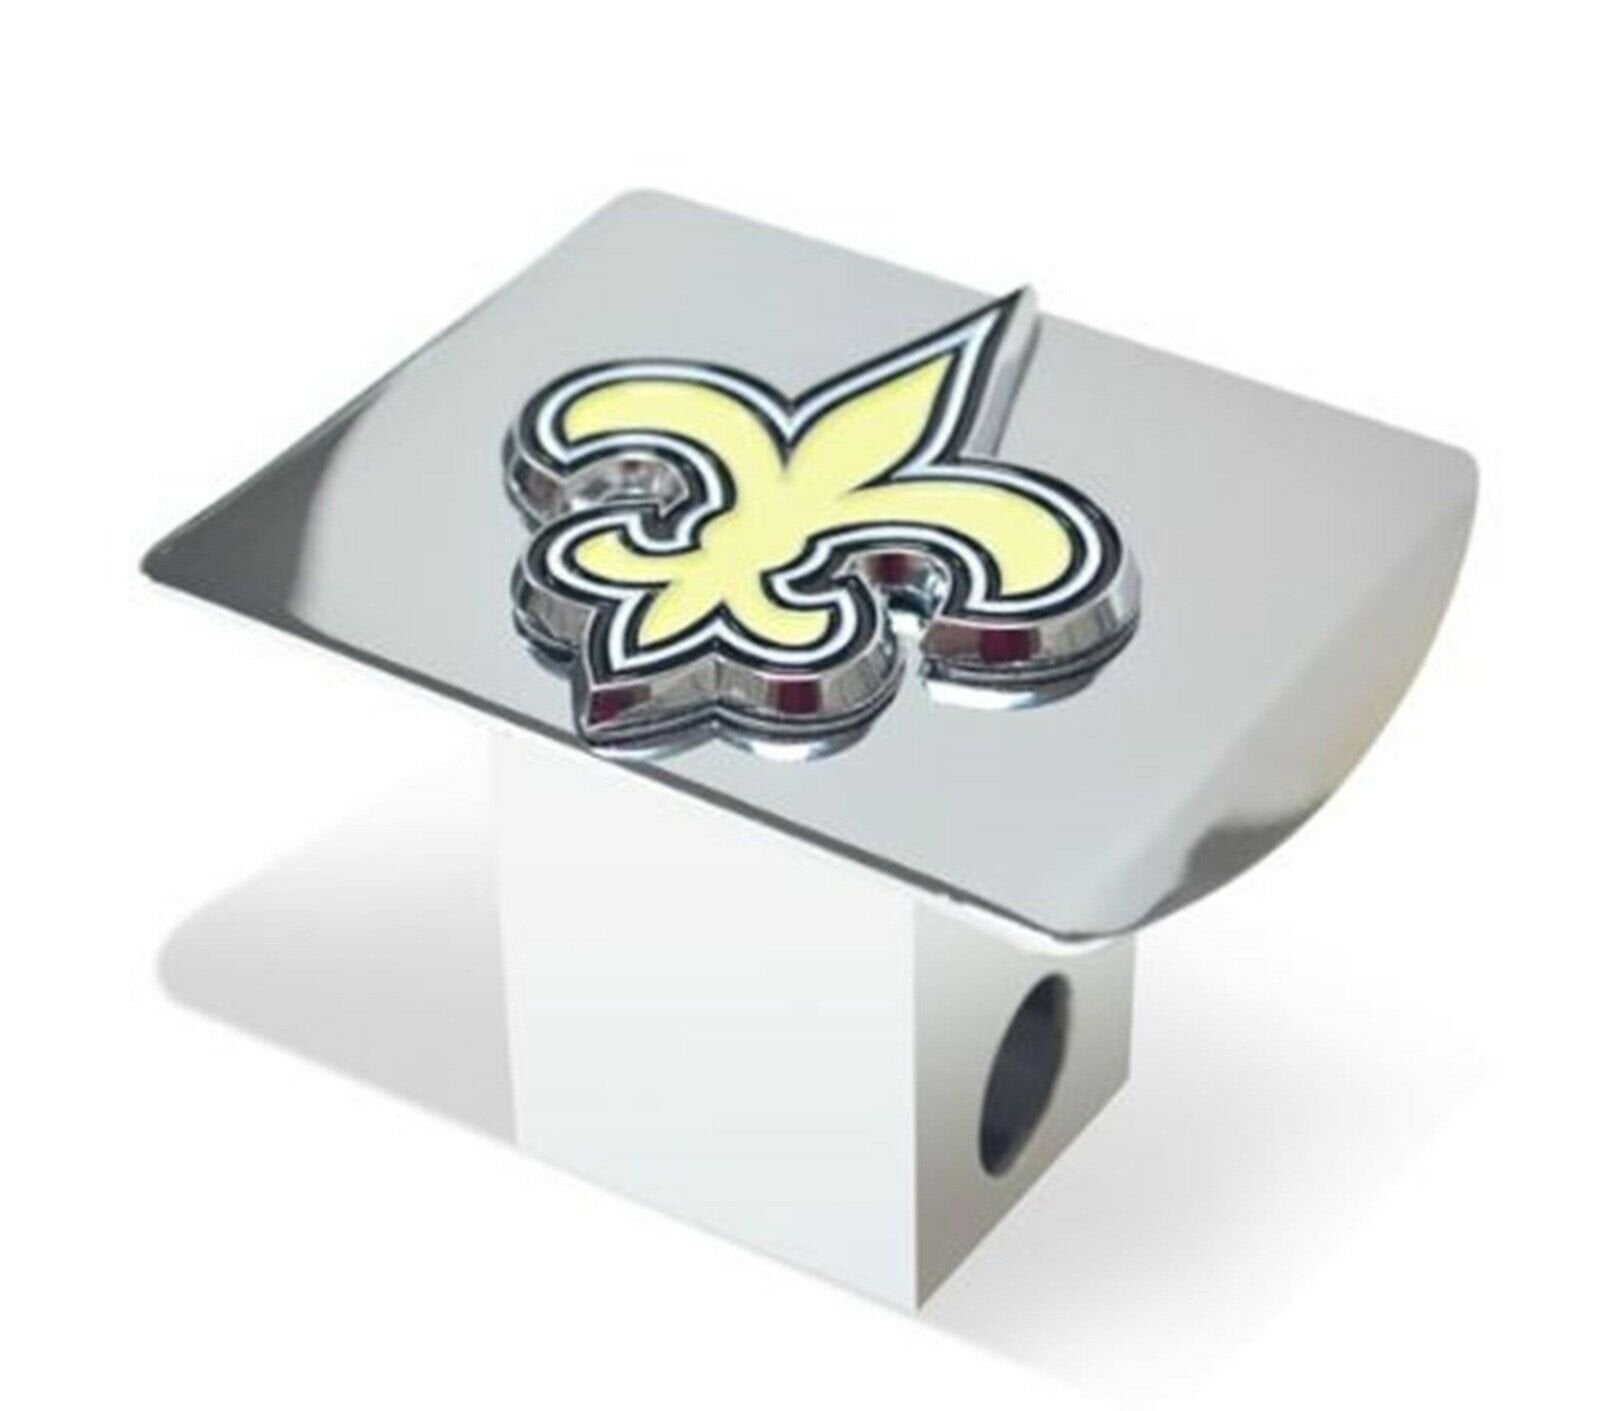 Denver Nuggets Hitch Cover Solid Metal with Raised Color Metal Emblem 2" Square Type III